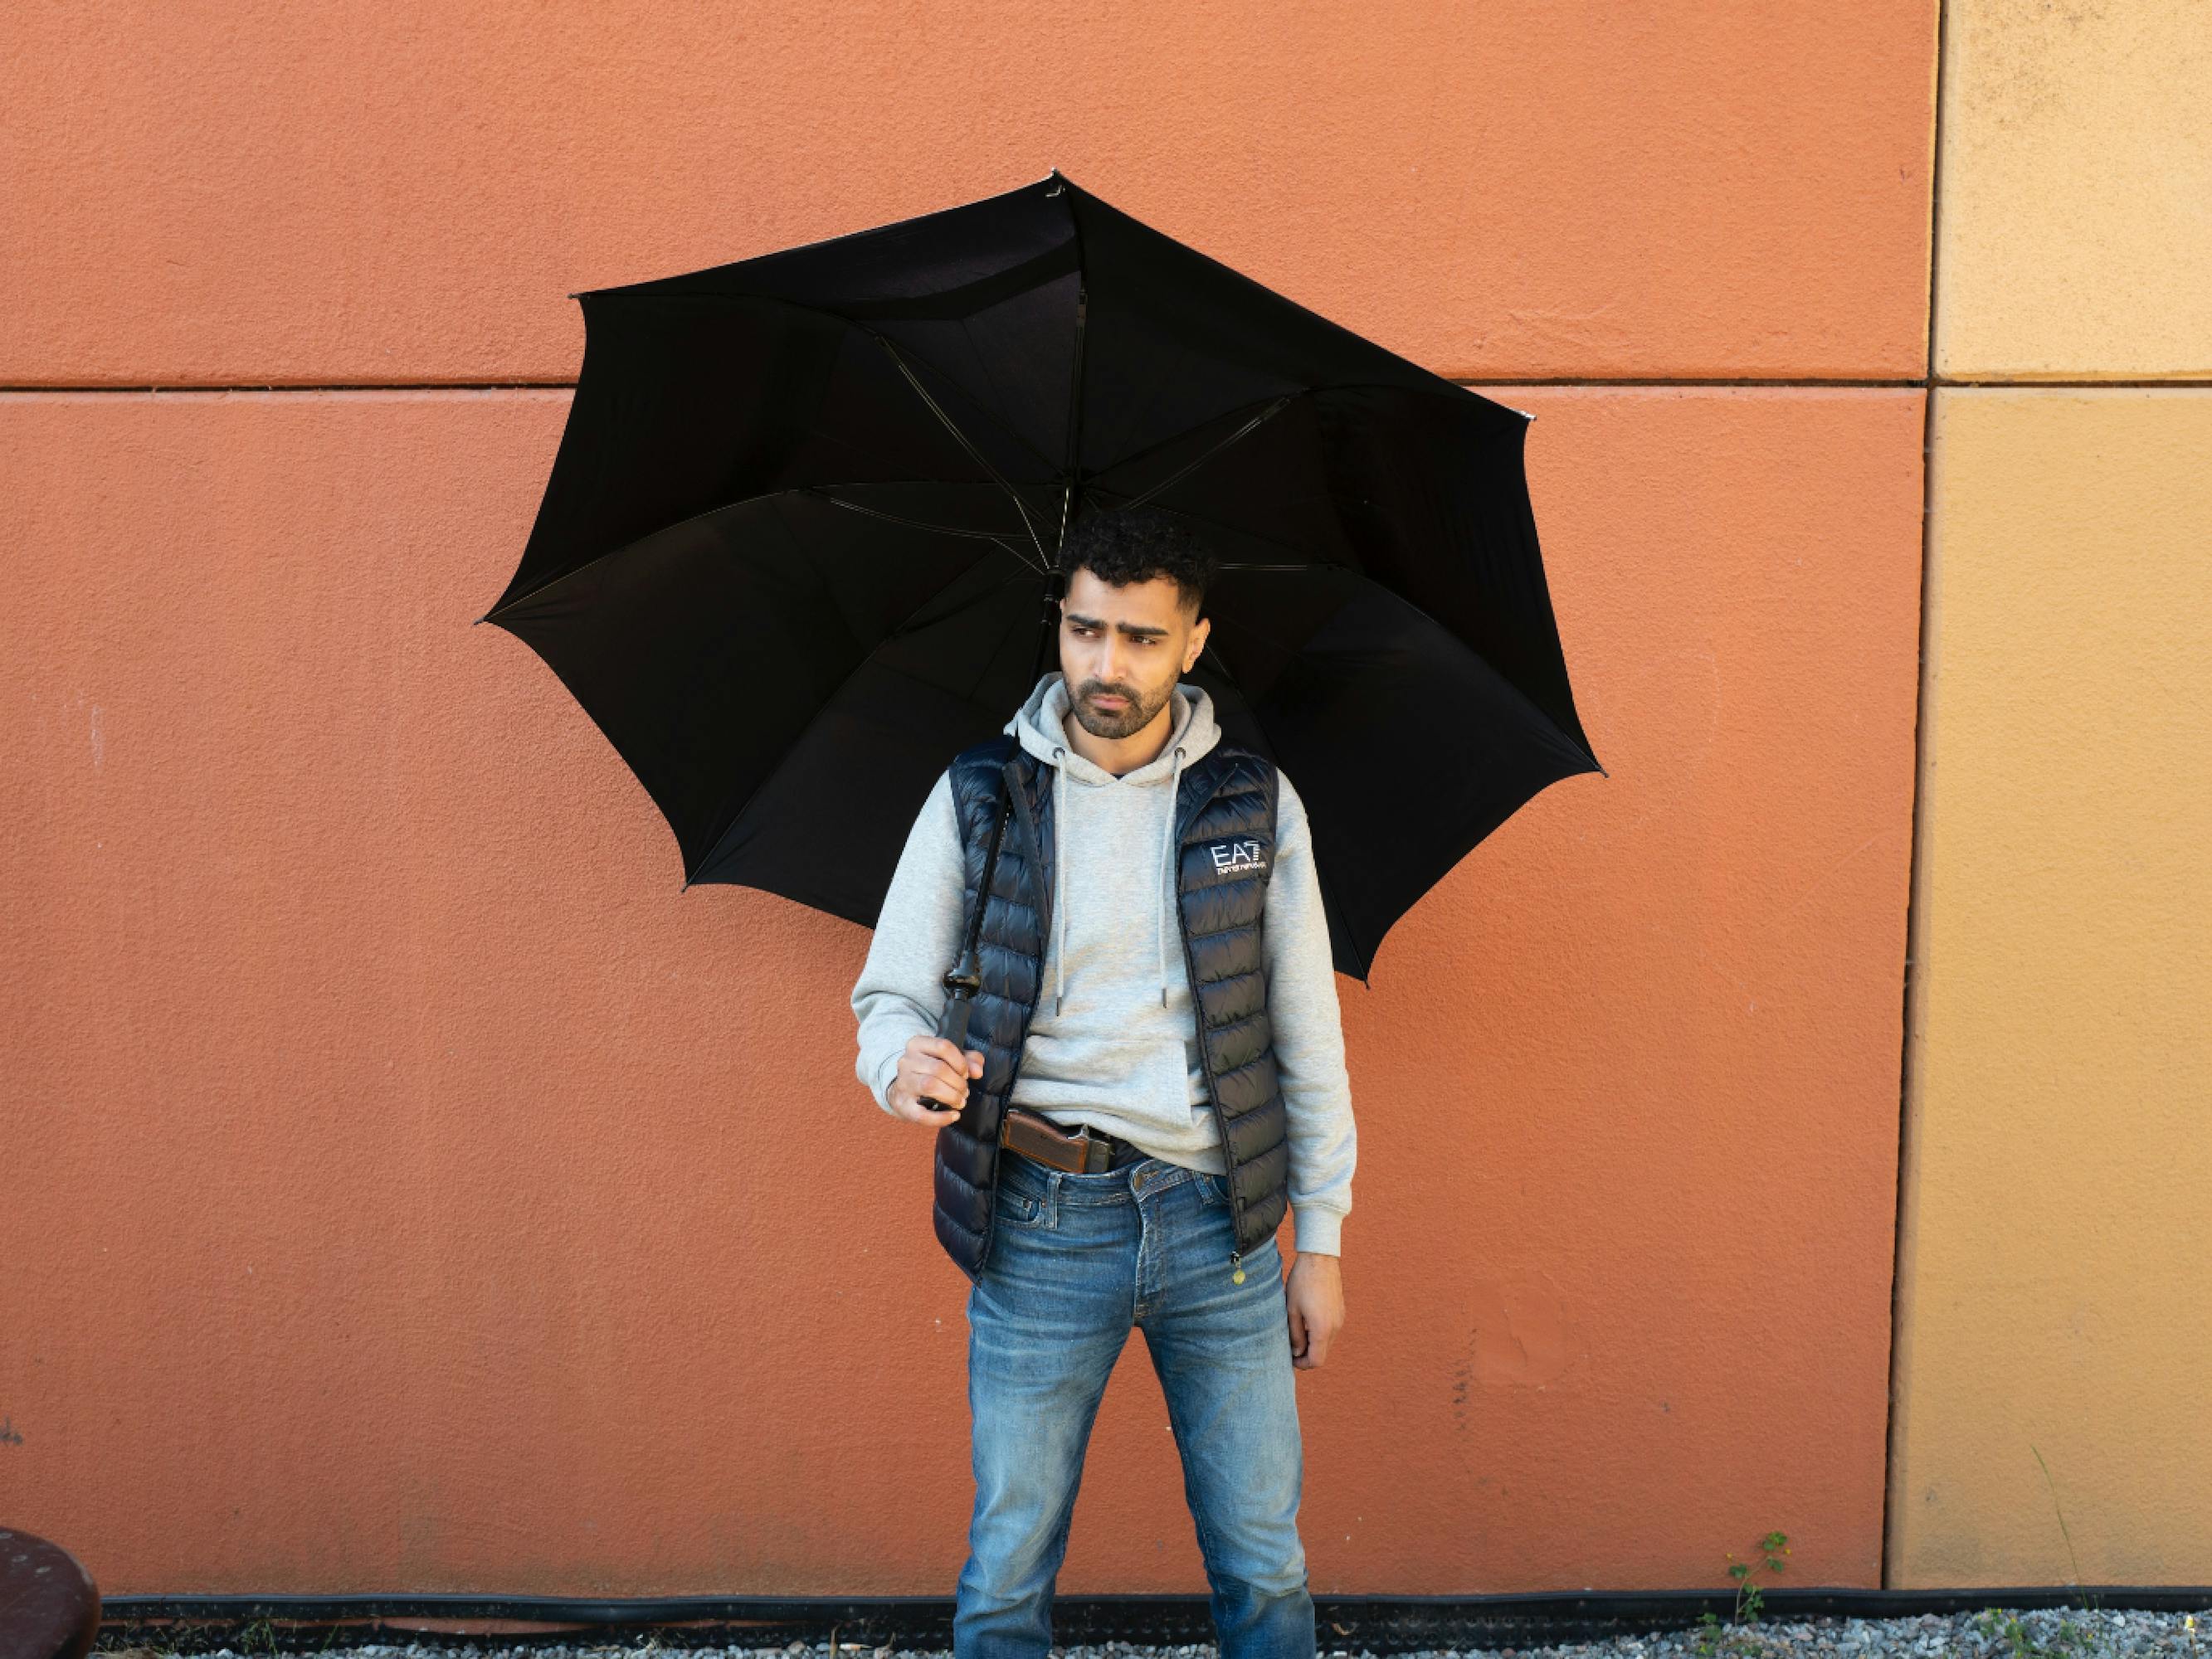 Alexander Abdallah wears jeans, a grey hoodie, and a black puffer vest. There is a gun in his front pocket, and he holds an umbrella above his head. There is an orange wall behind him.